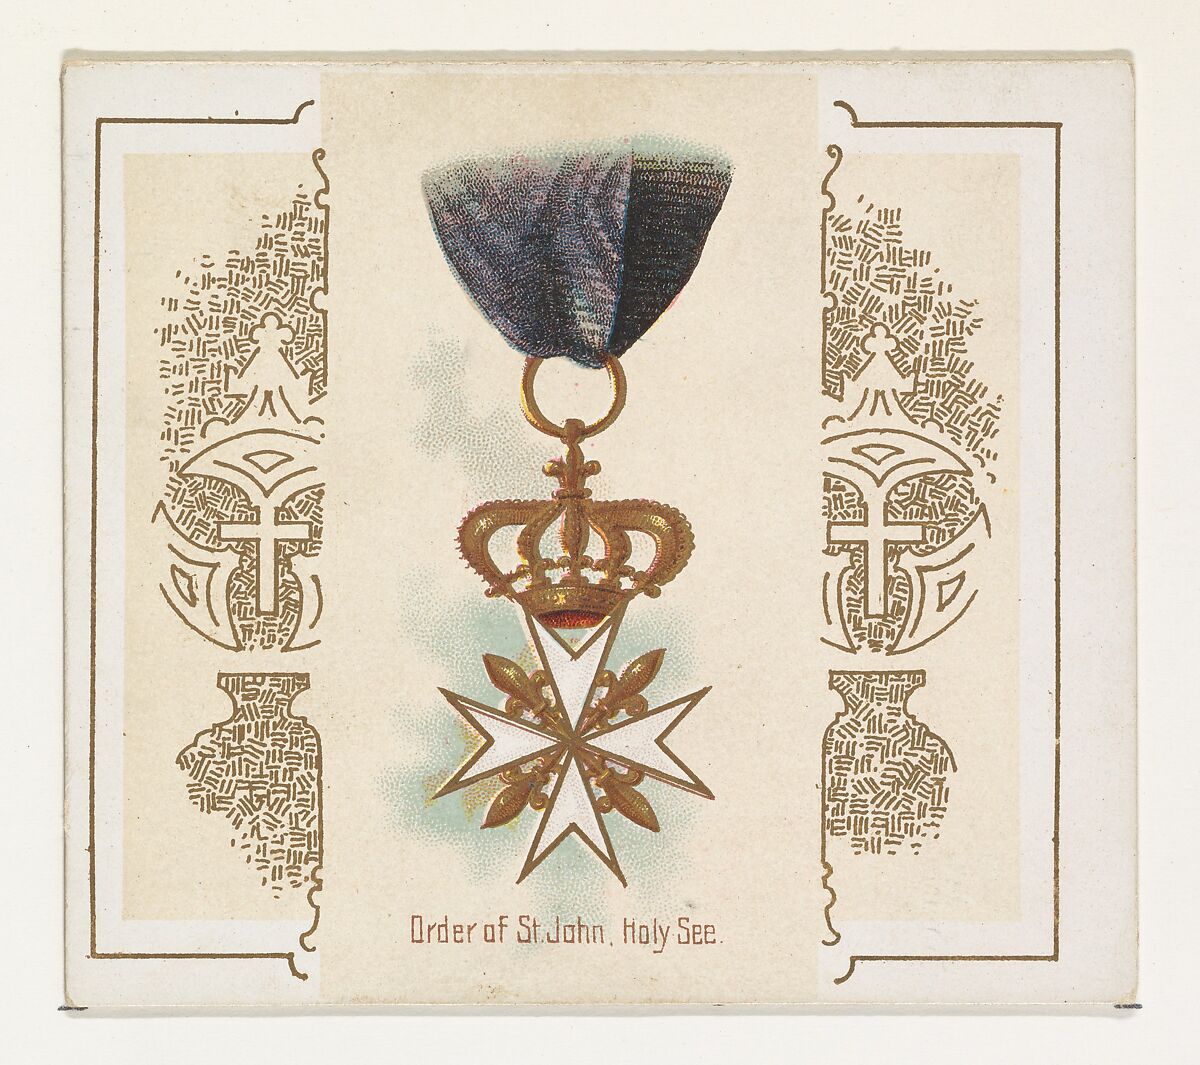 Order of Saint John, Holy See, from the World's Decorations series (N44) for Allen & Ginter Cigarettes, Issued by Allen &amp; Ginter (American, Richmond, Virginia), Commercial color lithograph 